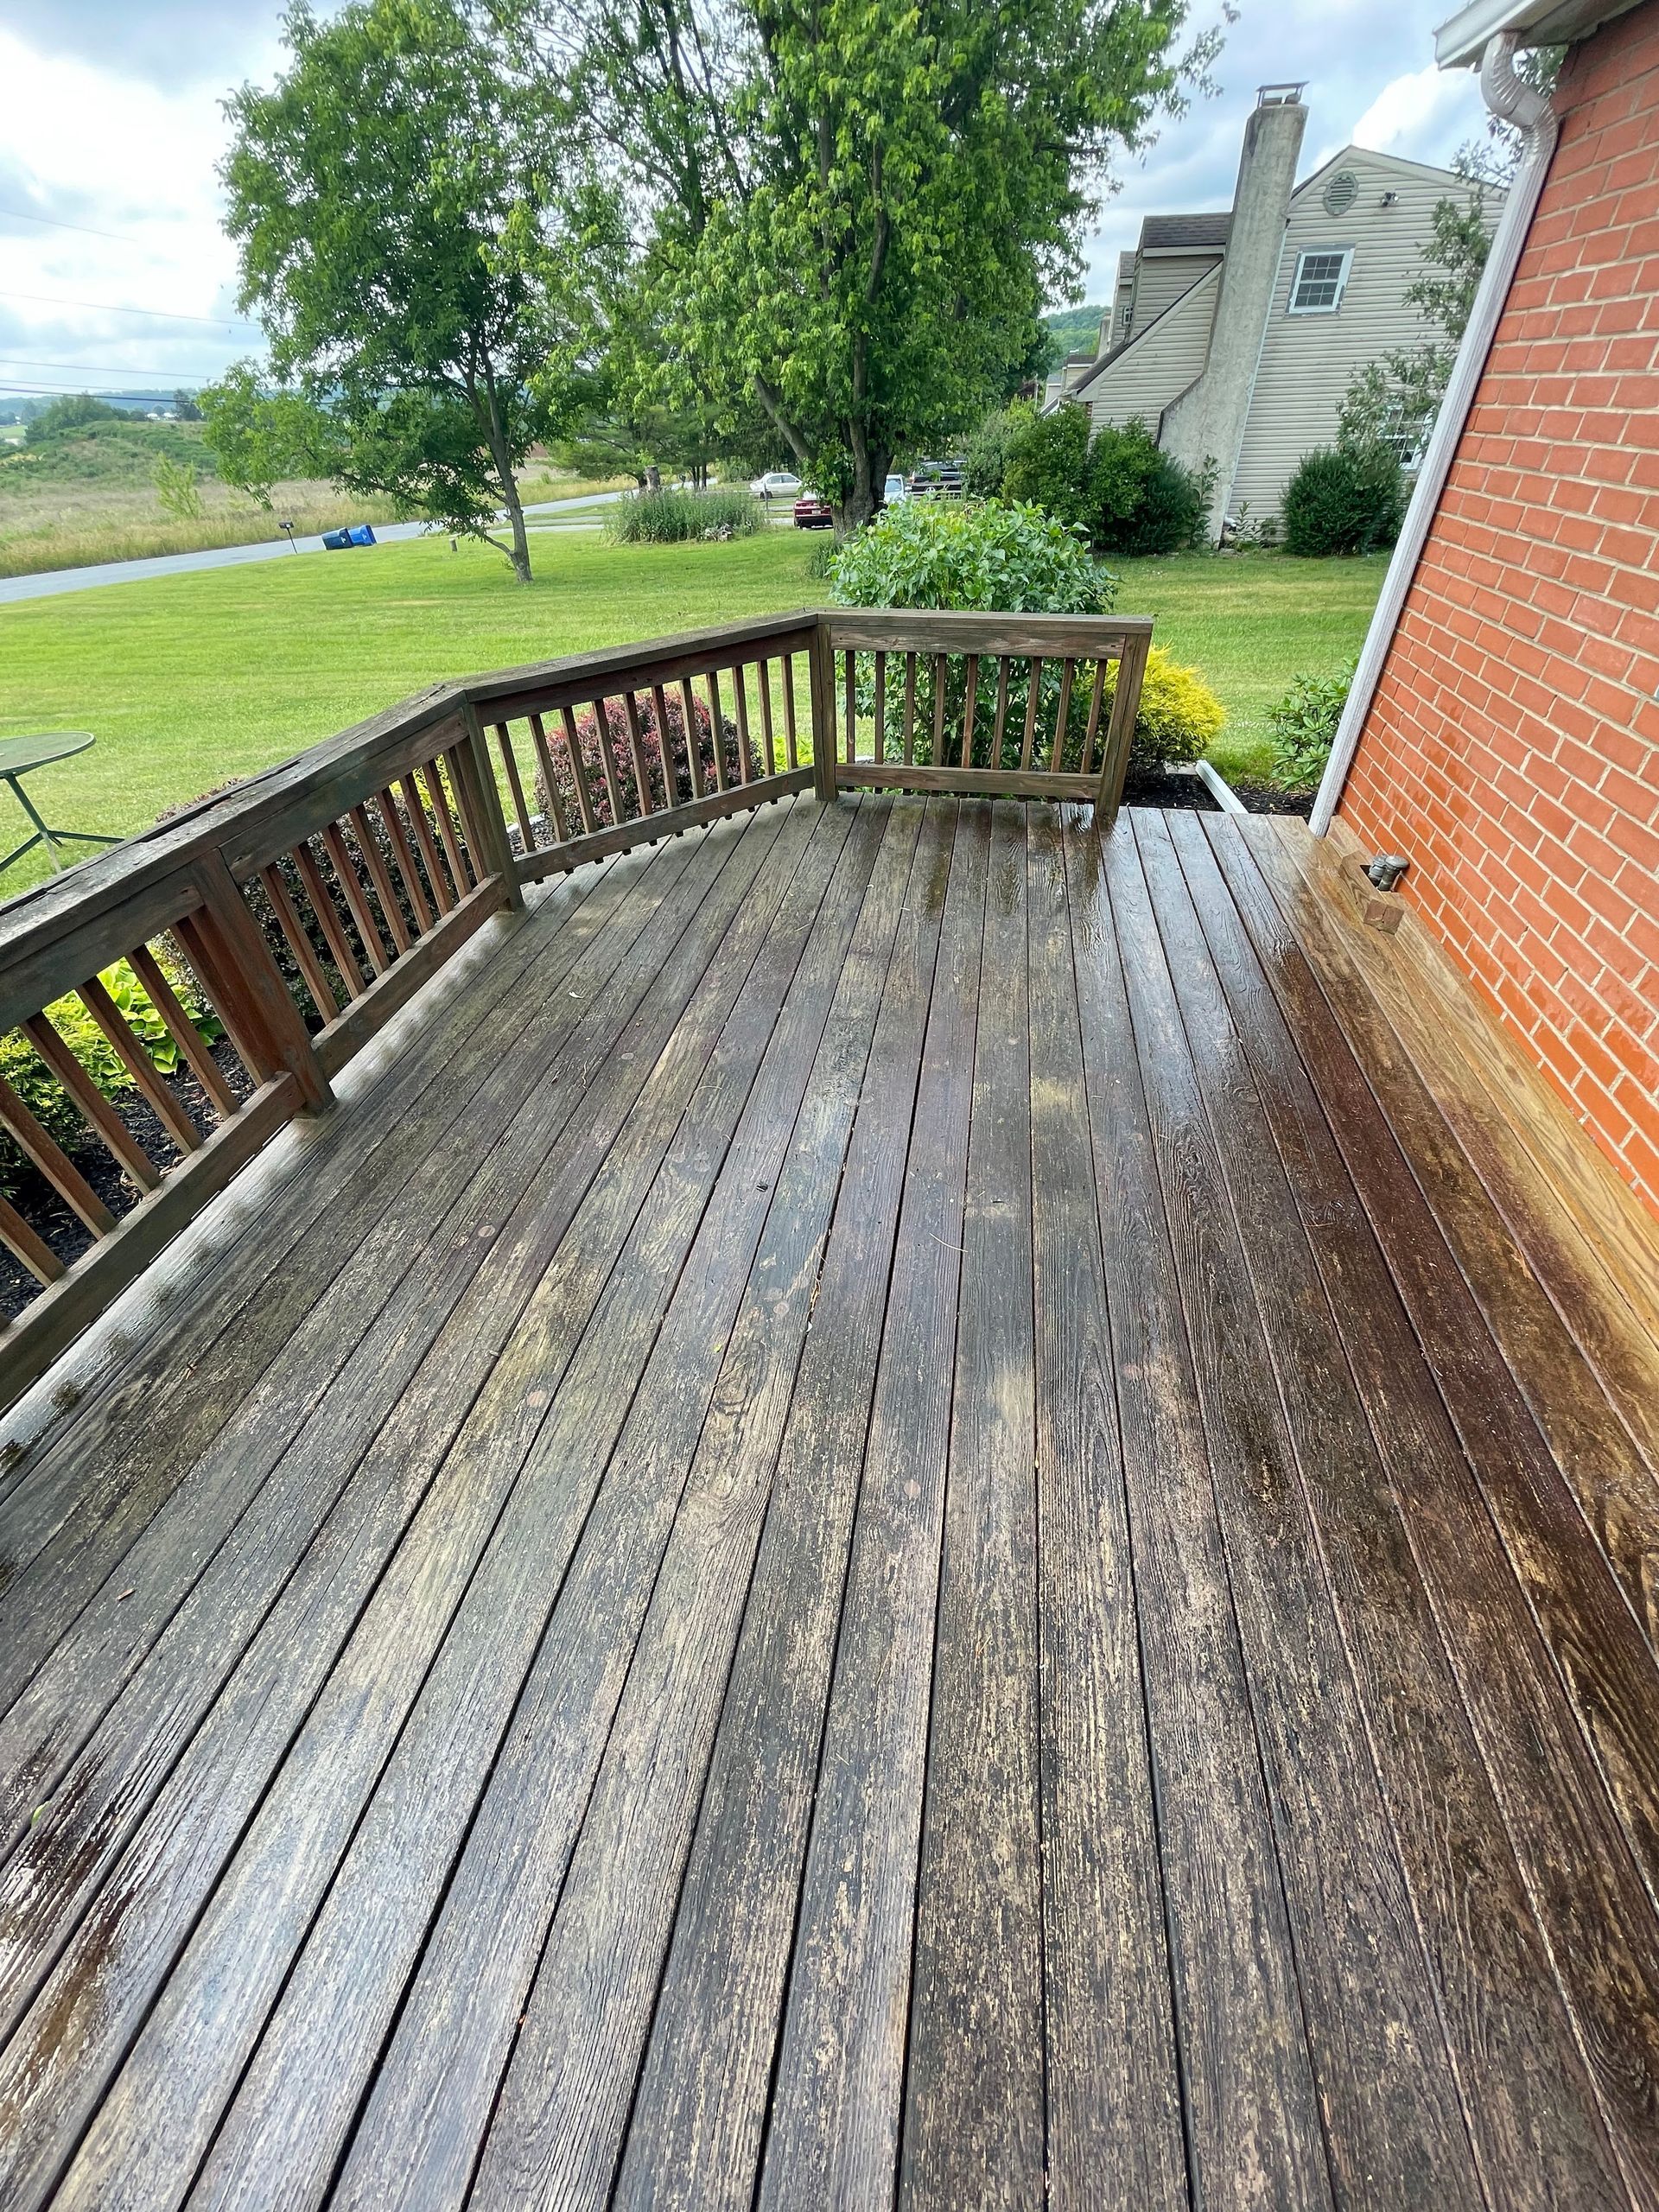 Before Power Washing the Deck